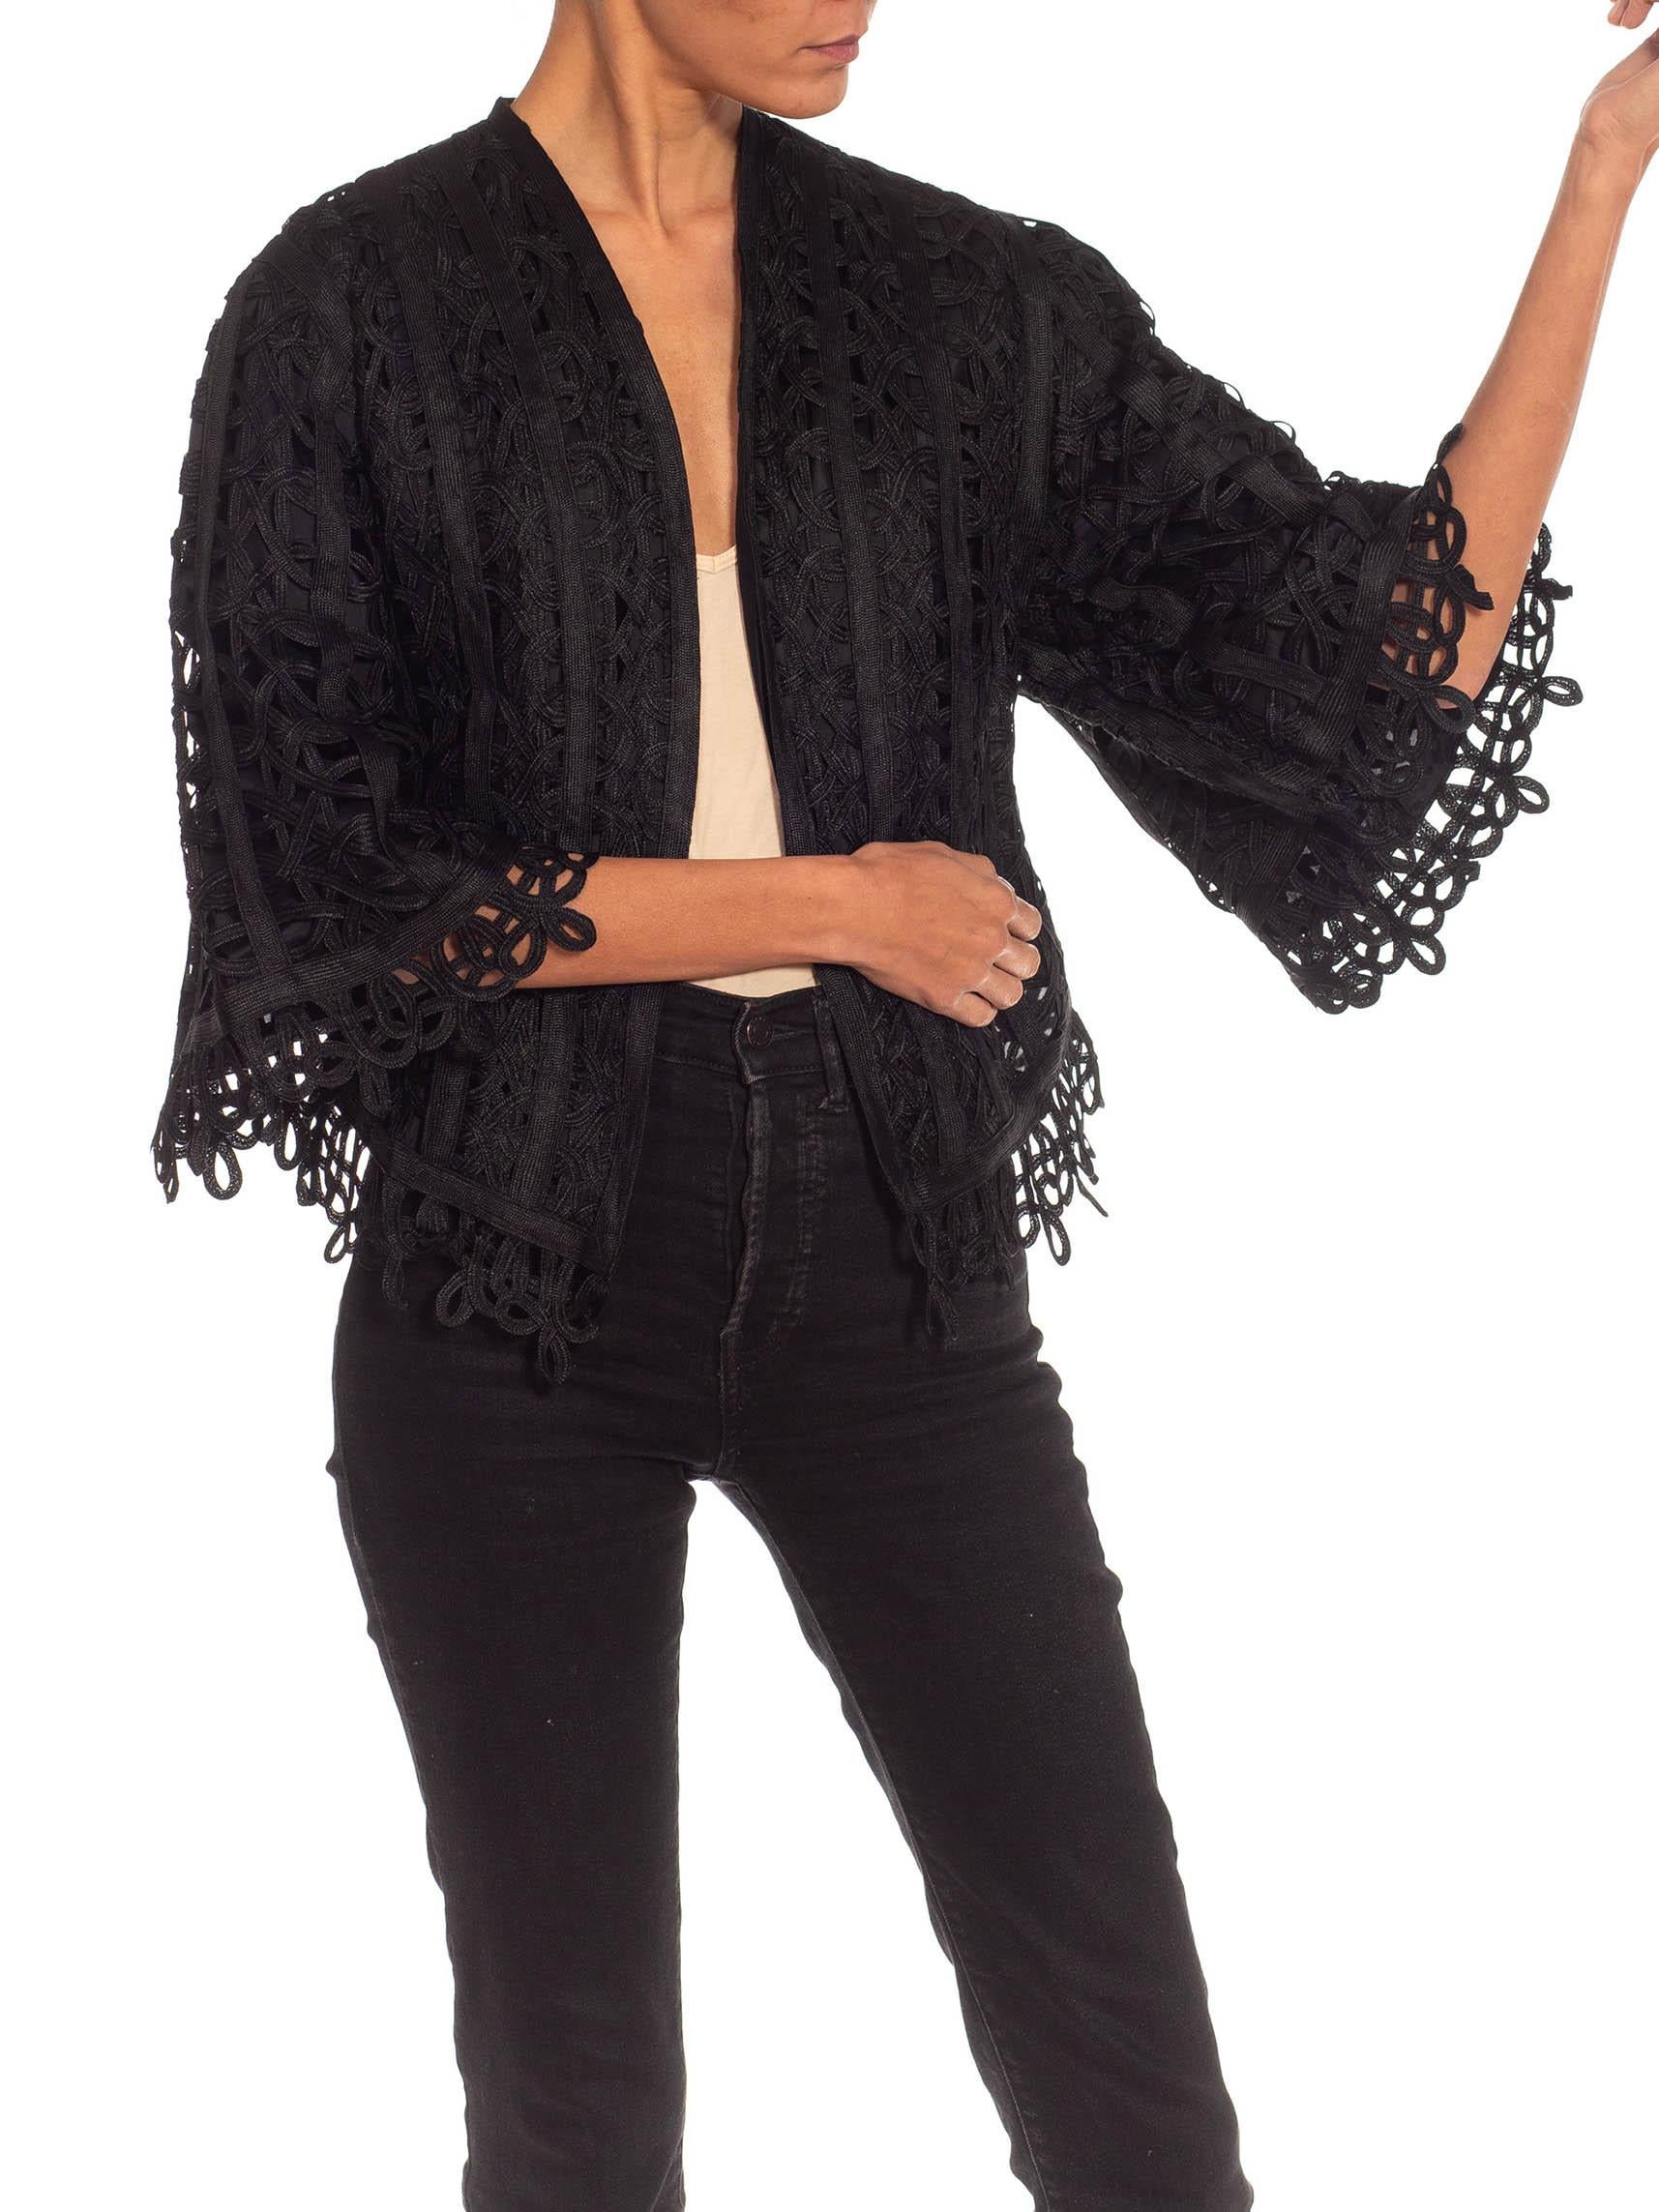 Victorian Black Silk Tape Lace Short Jacket With 3 Quarter Sleeves For Sale 5